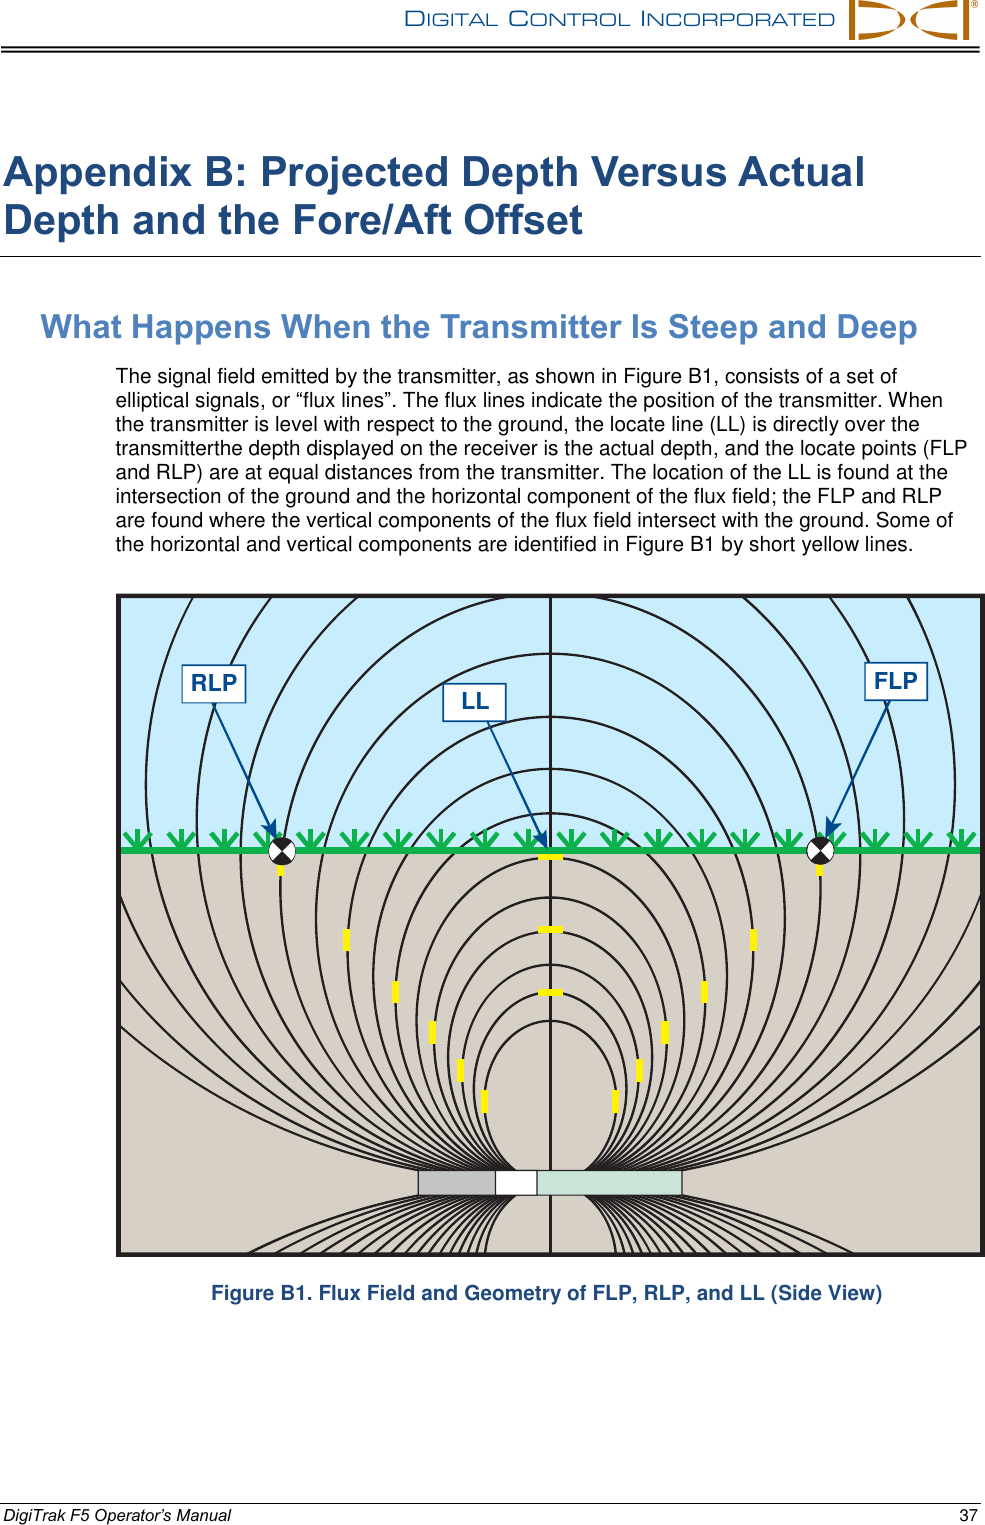 DIGITAL  CONTROL  INCORPORATED      DigiTrak F5 Operator’s Manual 37 Appendix B: Projected Depth Versus Actual Depth and the Fore/Aft Offset What Happens When the Transmitter Is Steep and Deep The signal field emitted by the transmitter, as shown in Figure B1, consists of a set of elliptical signals, or “flux lines”. The flux lines indicate the position of the transmitter. When the transmitter is level with respect to the ground, the locate line (LL) is directly over the transmitterthe depth displayed on the receiver is the actual depth, and the locate points (FLP and RLP) are at equal distances from the transmitter. The location of the LL is found at the intersection of the ground and the horizontal component of the flux field; the FLP and RLP are found where the vertical components of the flux field intersect with the ground. Some of the horizontal and vertical components are identified in Figure B1 by short yellow lines.  Figure B1. Flux Field and Geometry of FLP, RLP, and LL (Side View) RLP FLPLL